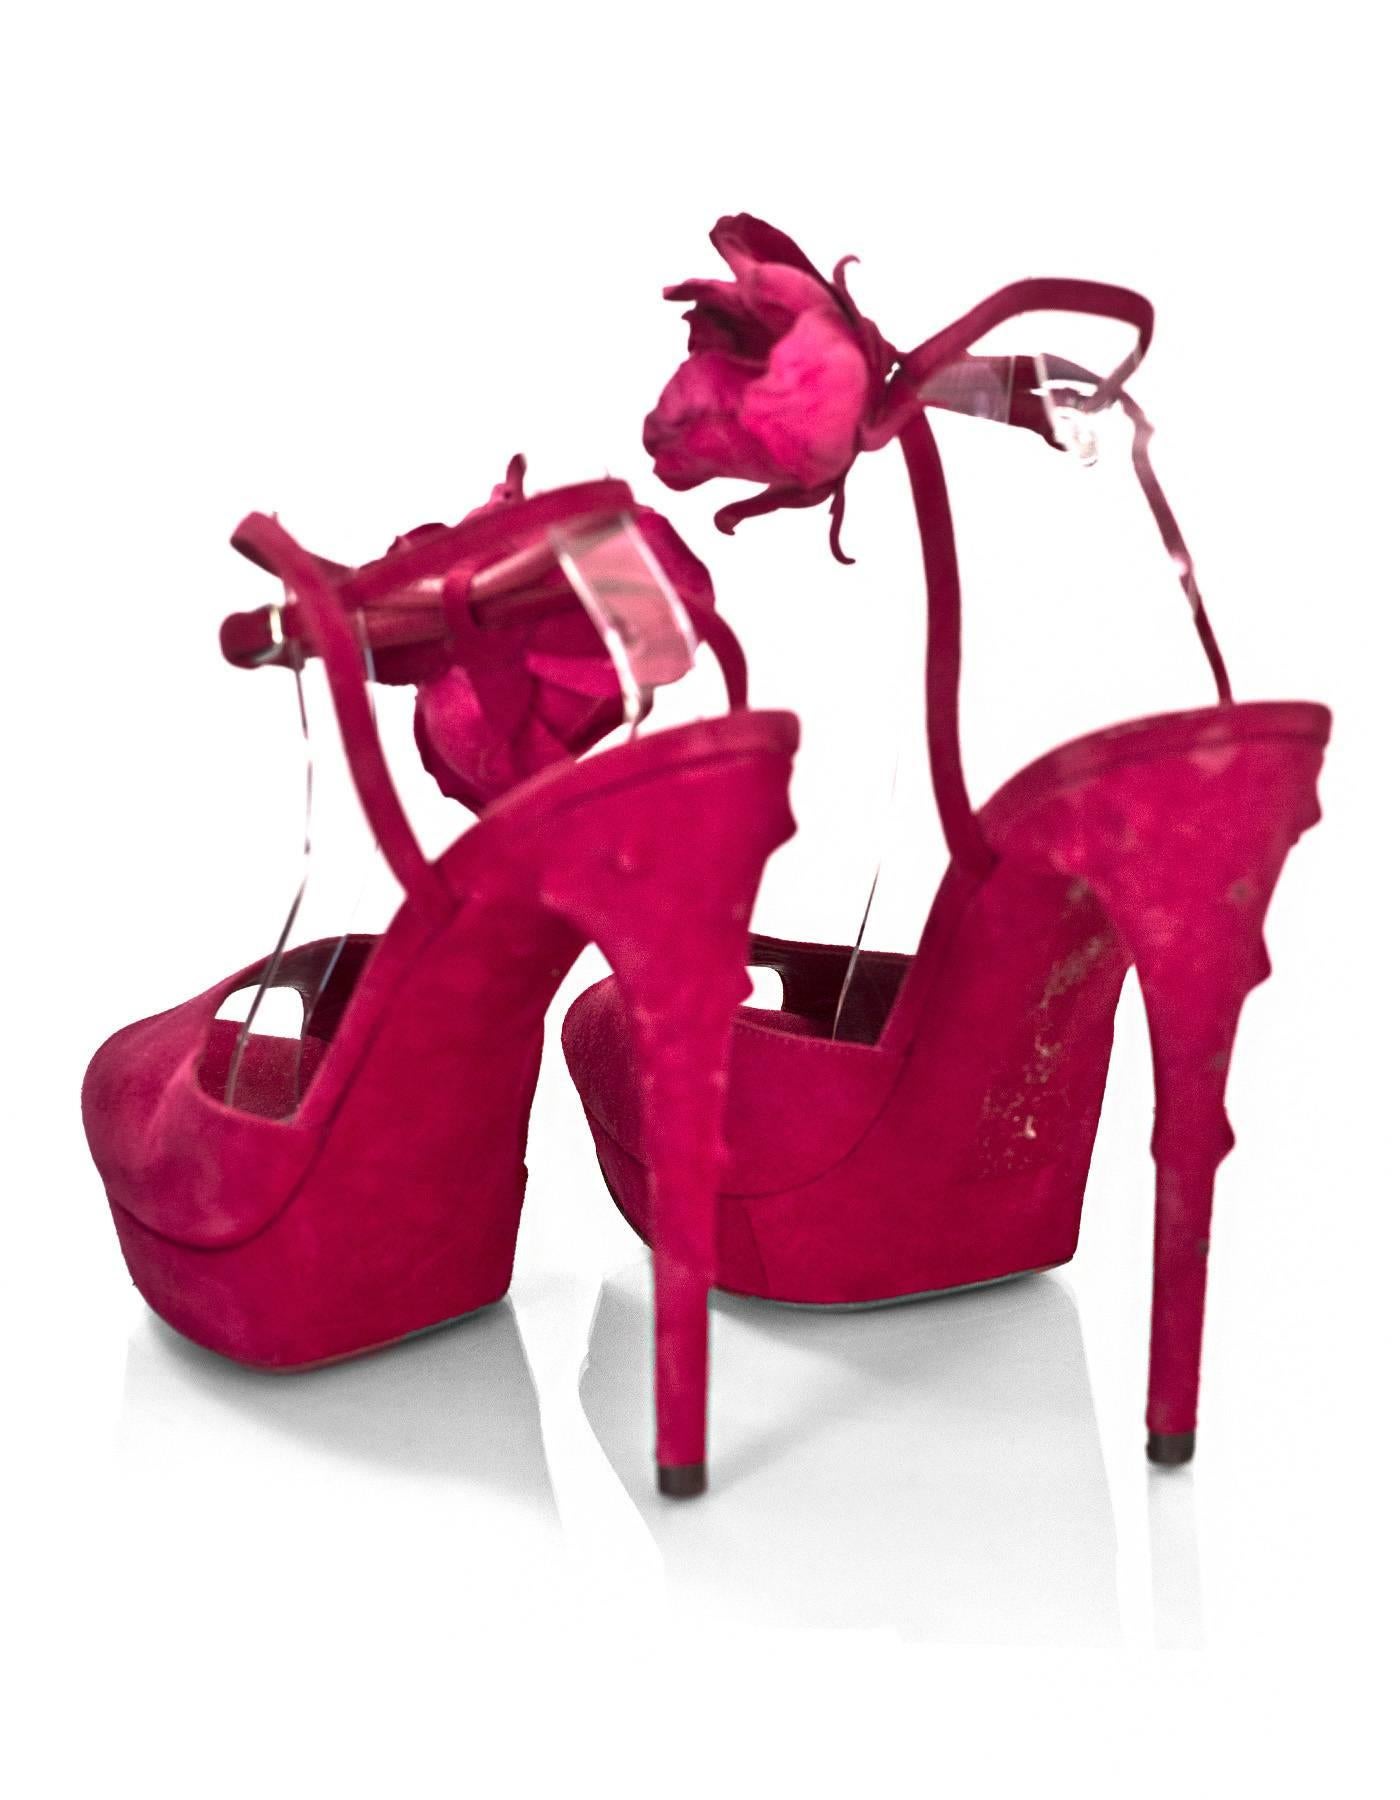 Red YSL Fuchsia Suede Open-Toe Sublime Sandals Sz 41